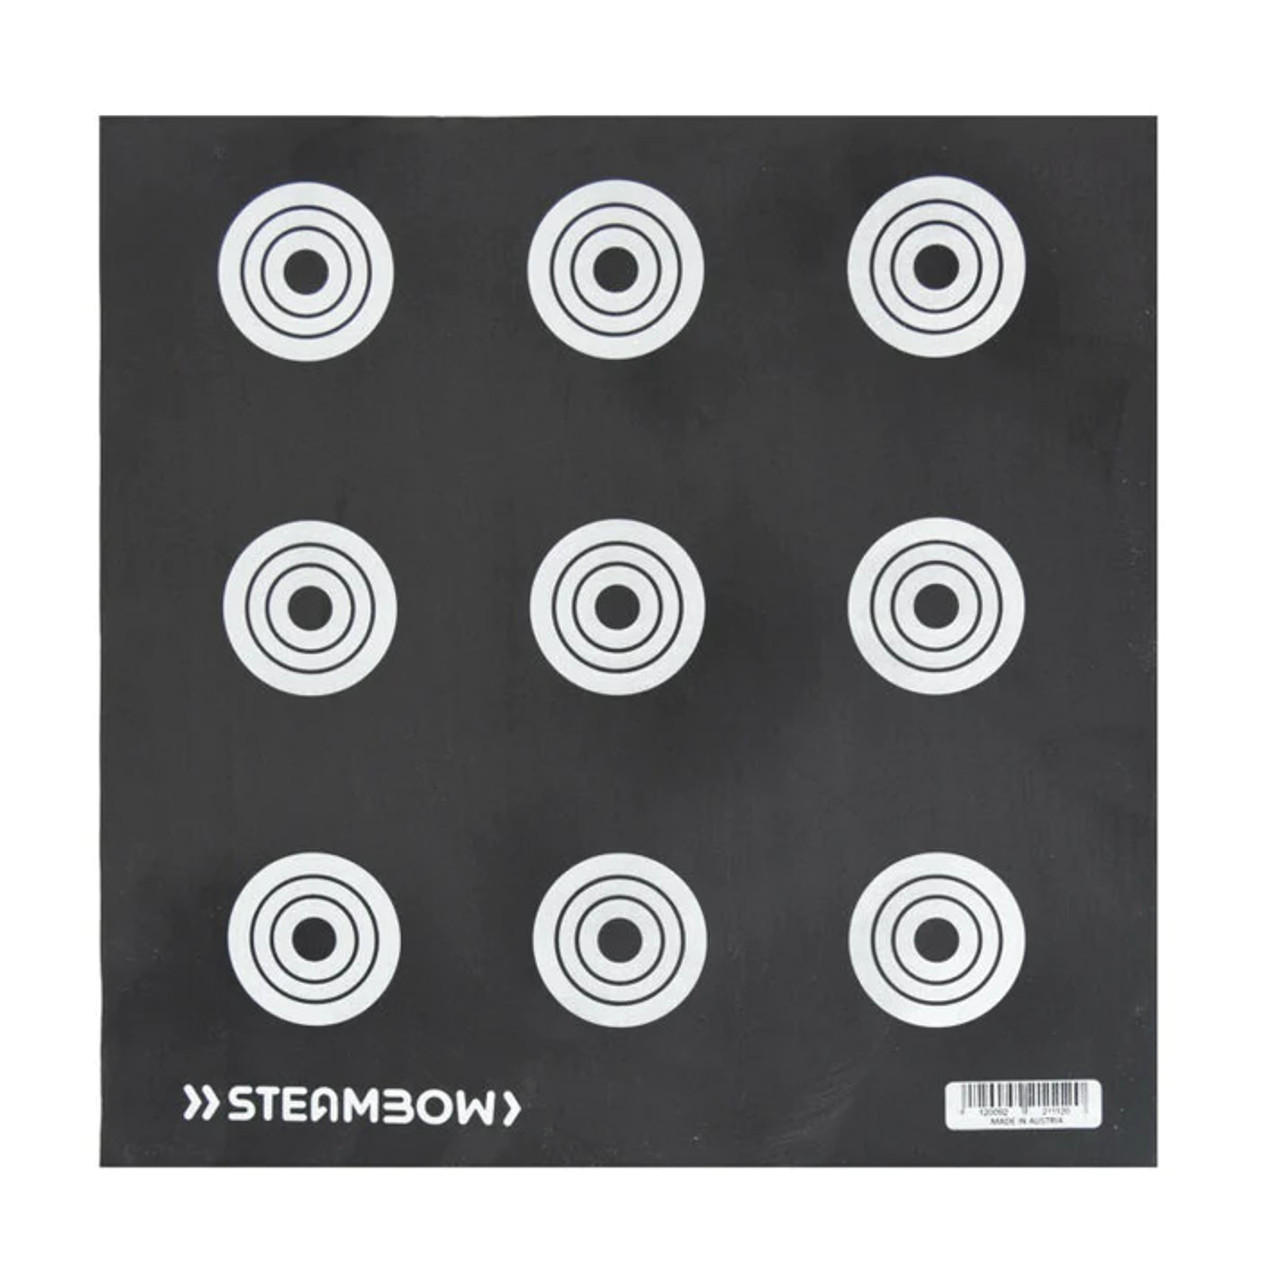 This high quality target is made in Austria by Steambow especially for the Stinger repeating crossbows.

On the front there are 9 small targets that are ideal for the AR-6 Stinger. There’s a large target on the reverse. So either side of this target can be used according to personal preference.

This mat can be shot at with the field tip arrows, hunting broadheads and Bodkin tipped arrows without any problems.